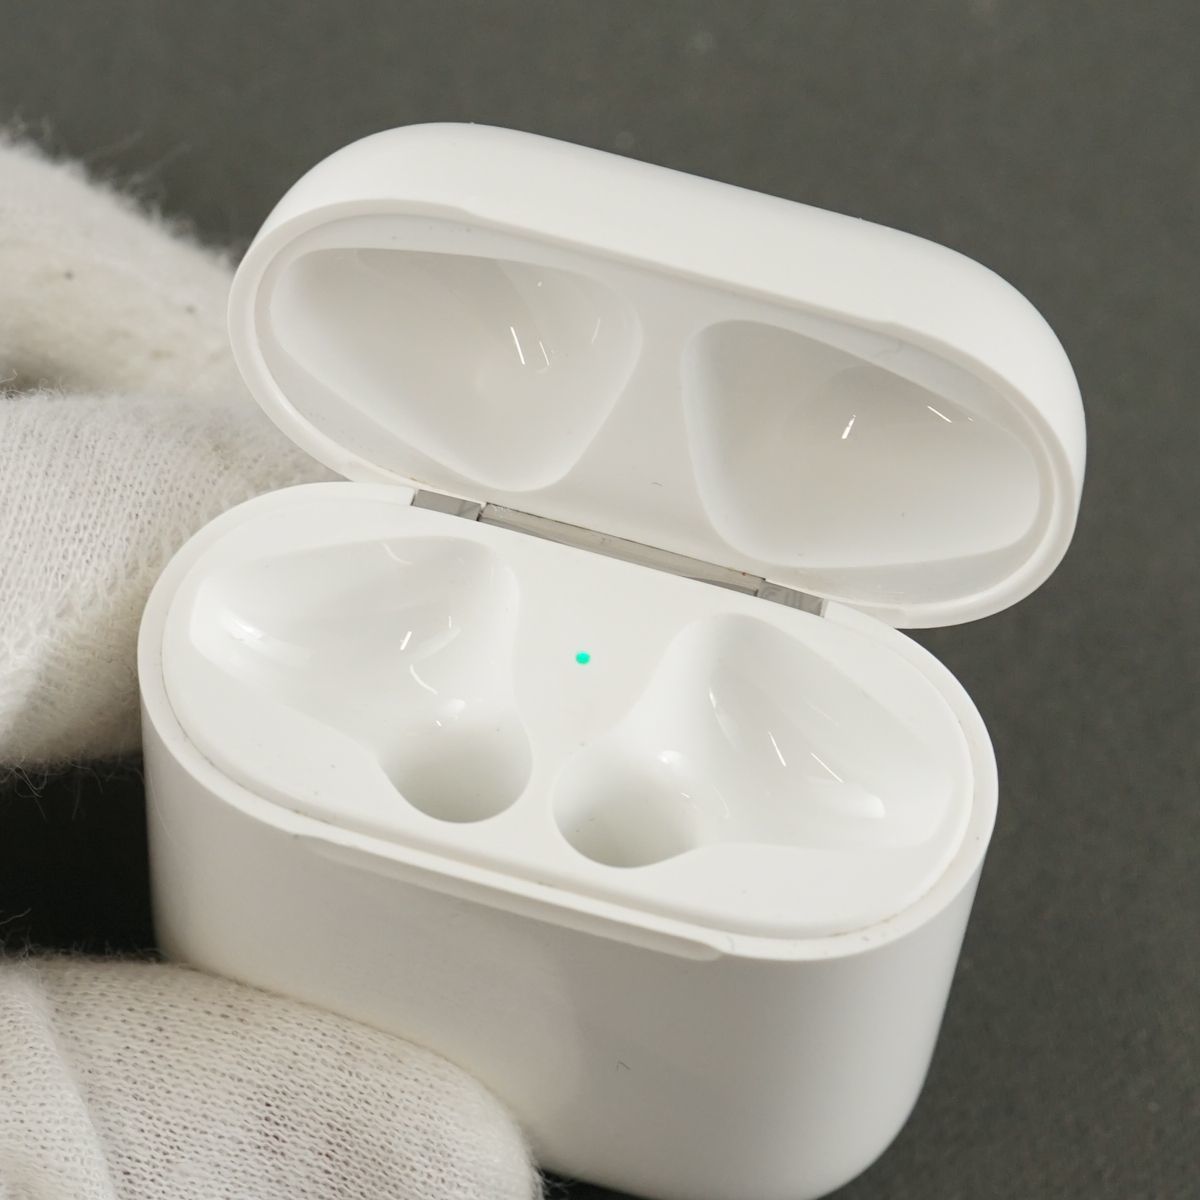 Apple AirPods with Charging Case エアーポッズ ワイヤレスイヤホン USED品 第二世代 Bluetooth MV7N2J/A 完動品 即日発送 T V8018_画像10